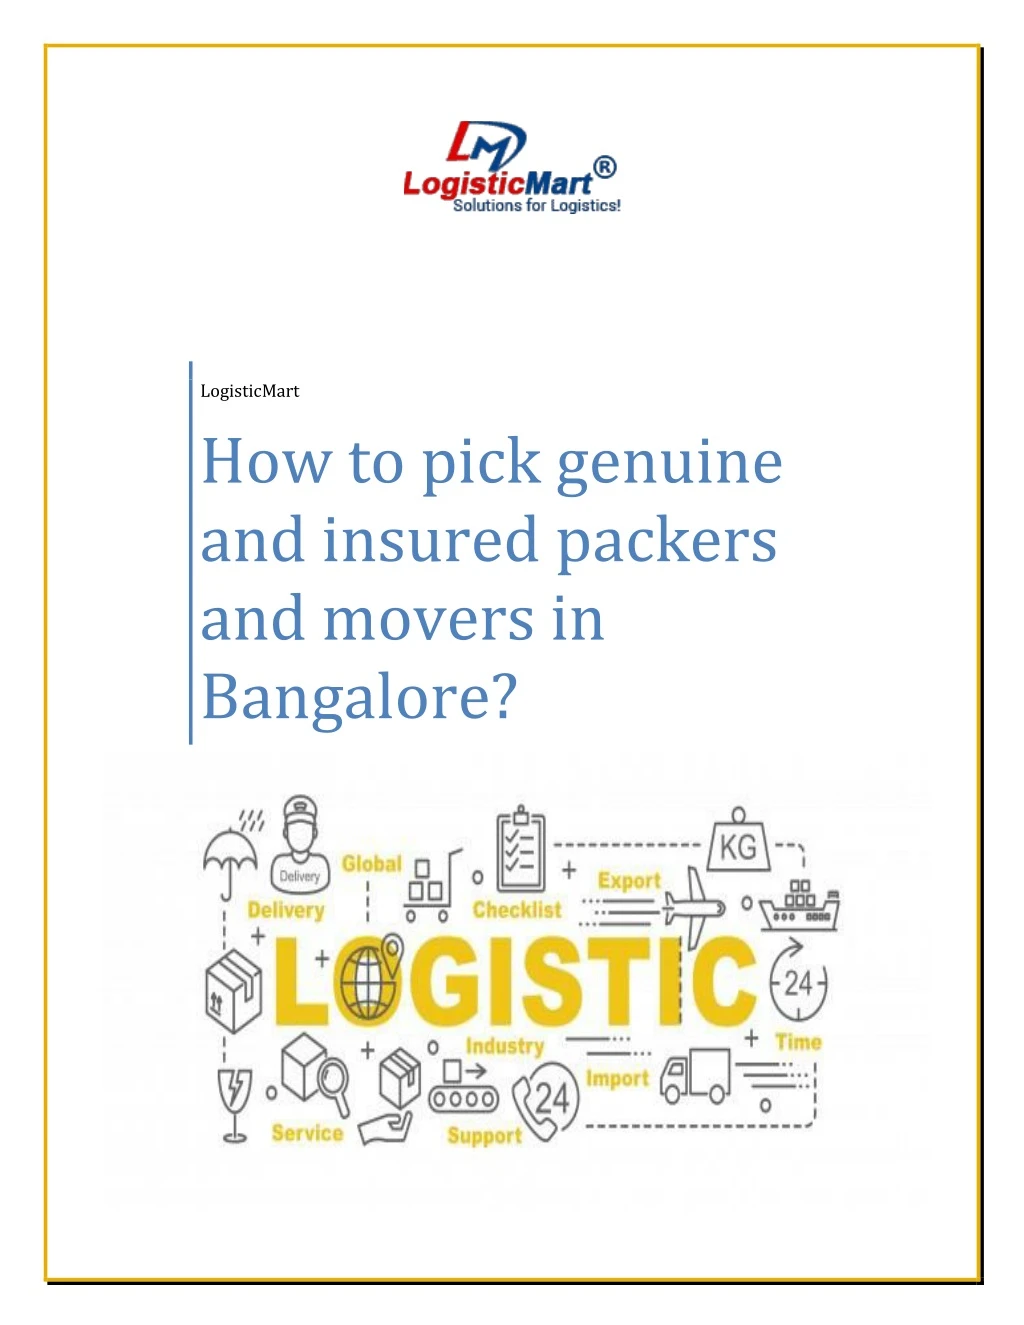 logisticmart how to pick genuine and insured